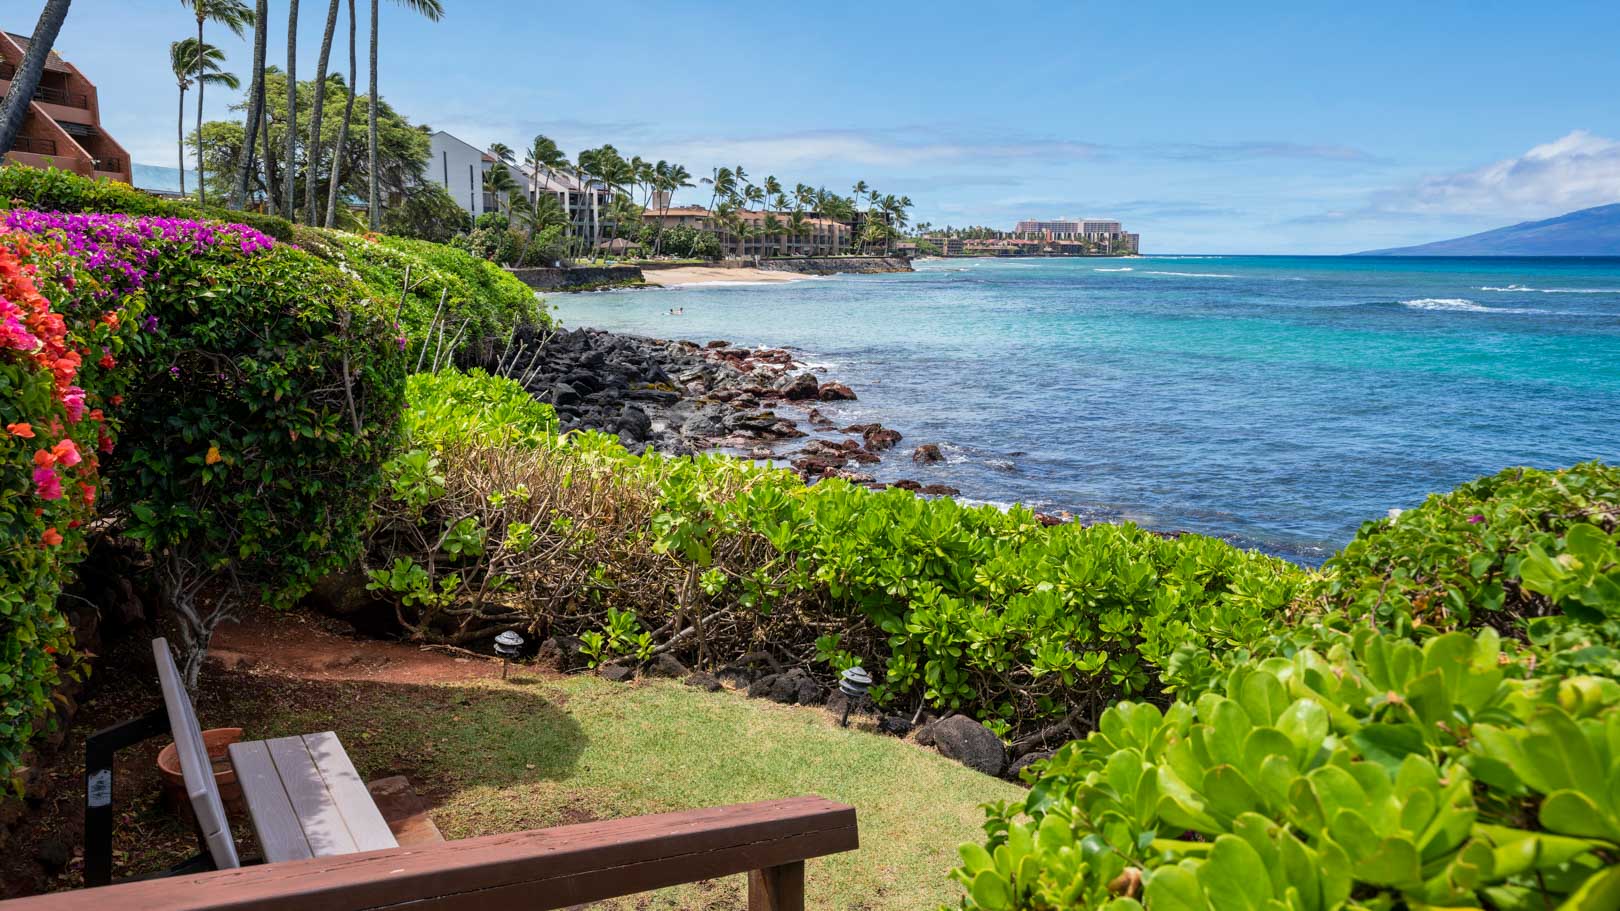 A relaxing view of the beach at VRI's Kuleana Club in Maui, Hawaii.